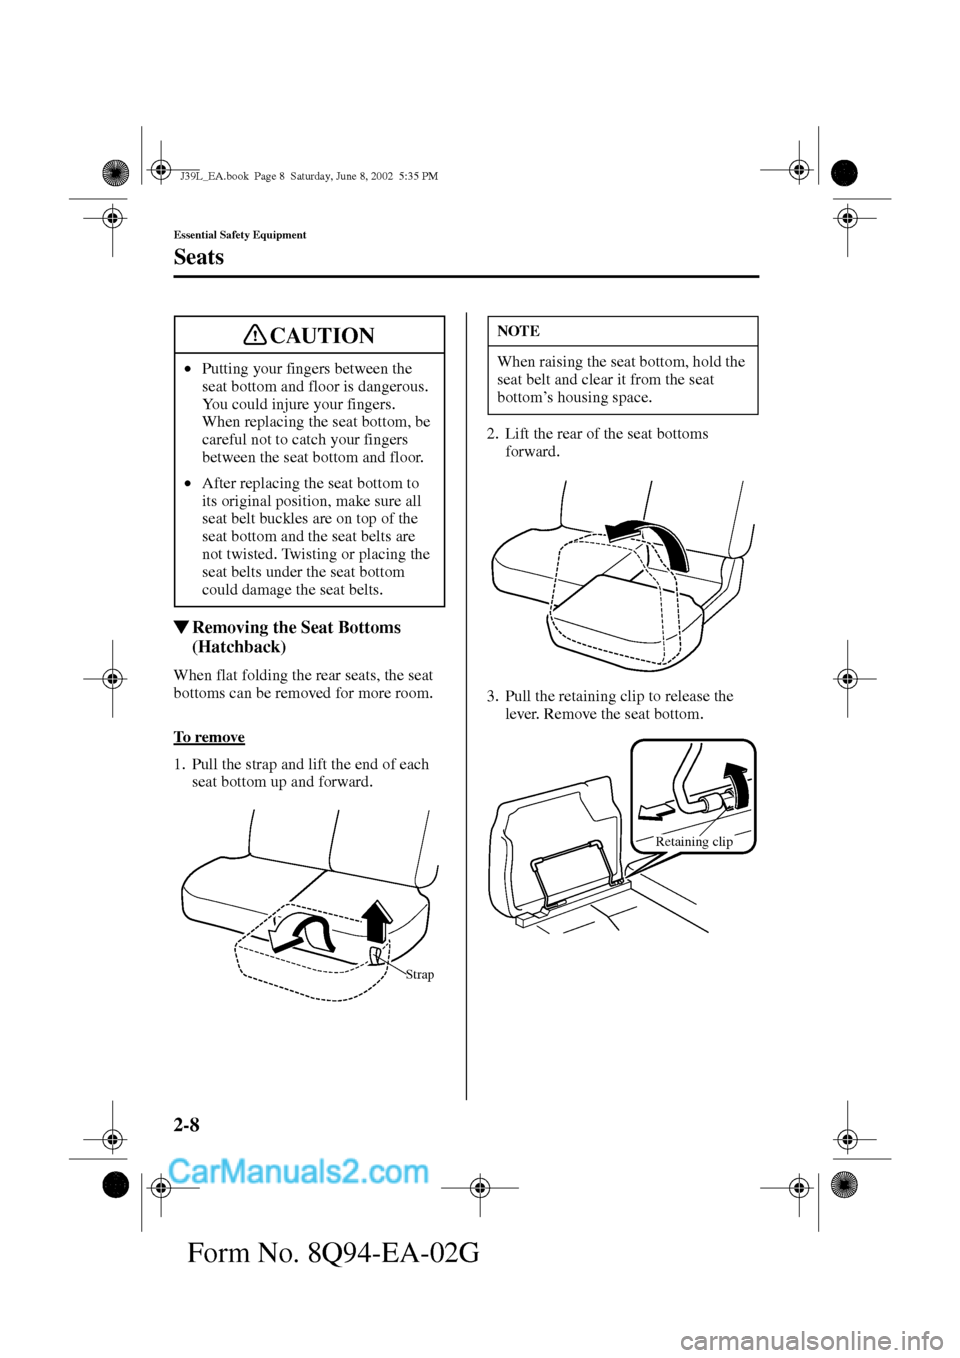 MAZDA MODEL PROTÉGÉ 2003   (in English) User Guide 2-8
Essential Safety Equipment
Seats
Form No. 8Q94-EA-02G
Removing the Seat Bottoms 
(Hatchback)
When flat folding the rear seats, the seat 
bottoms can be removed for more room.
To  r e m o v e
1. P